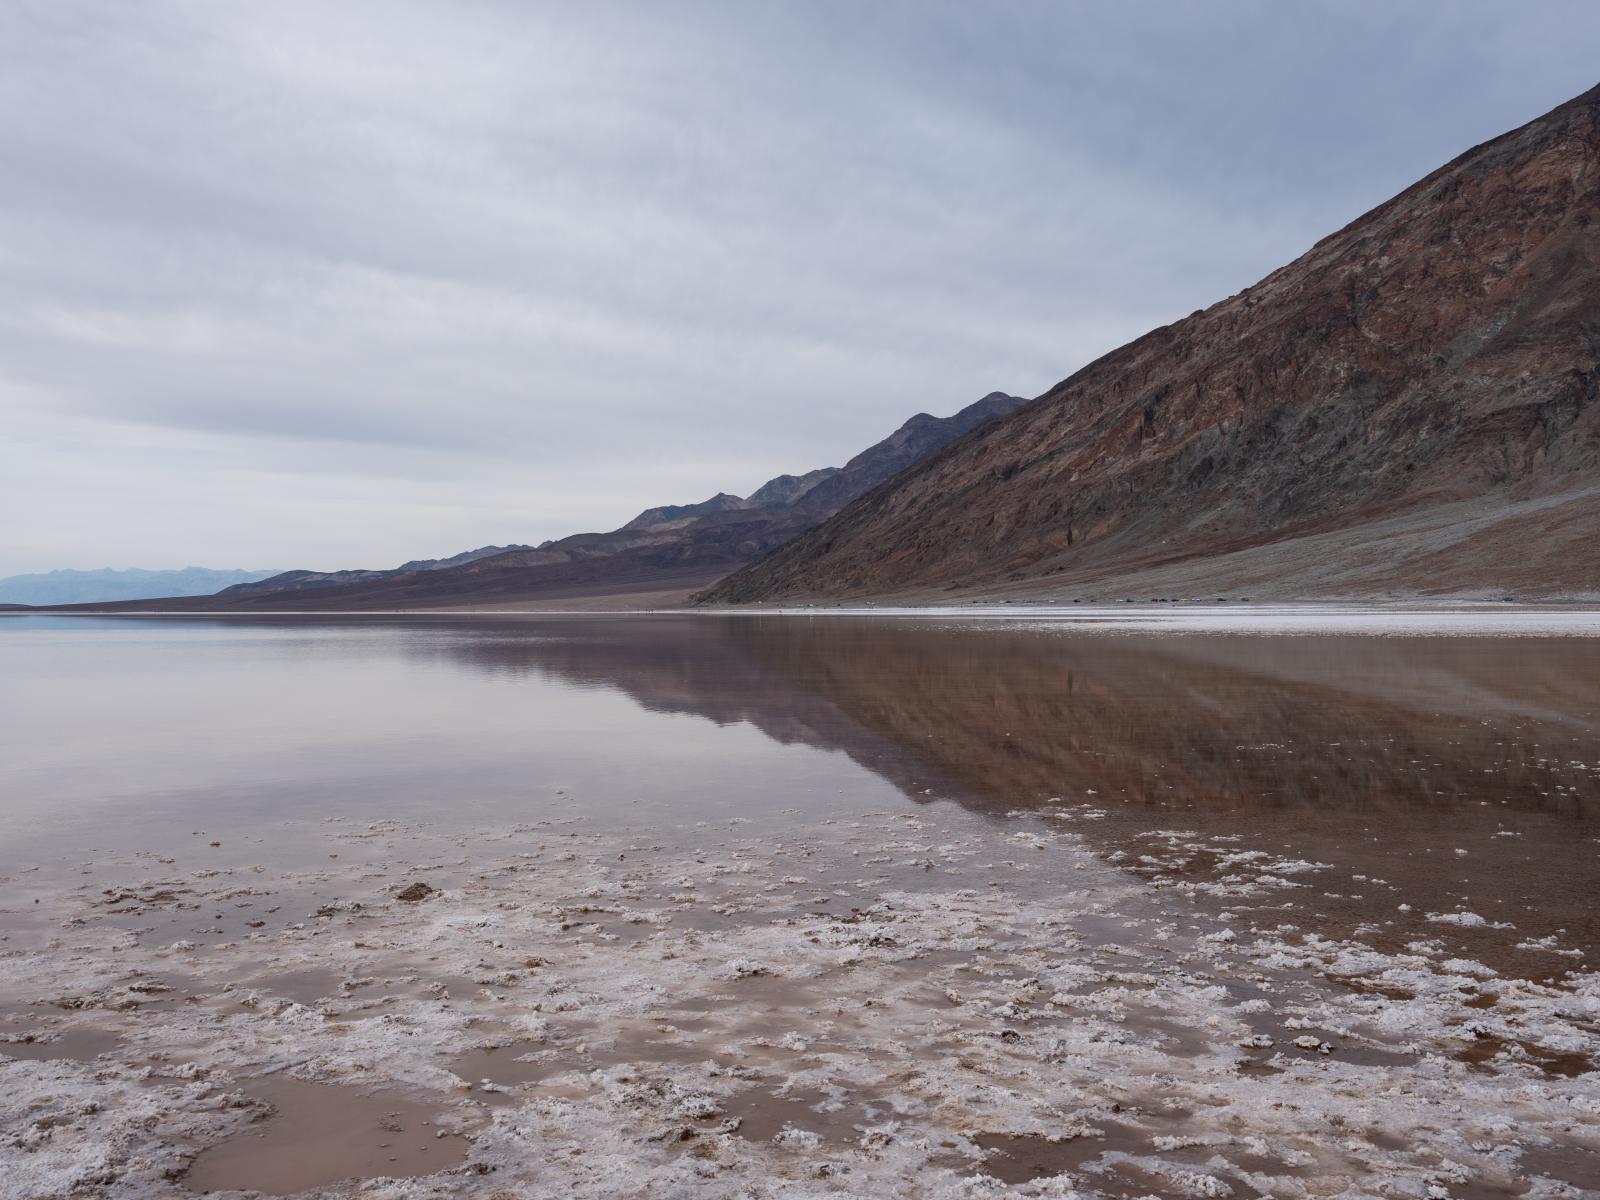 Lake Manly, Death Valley